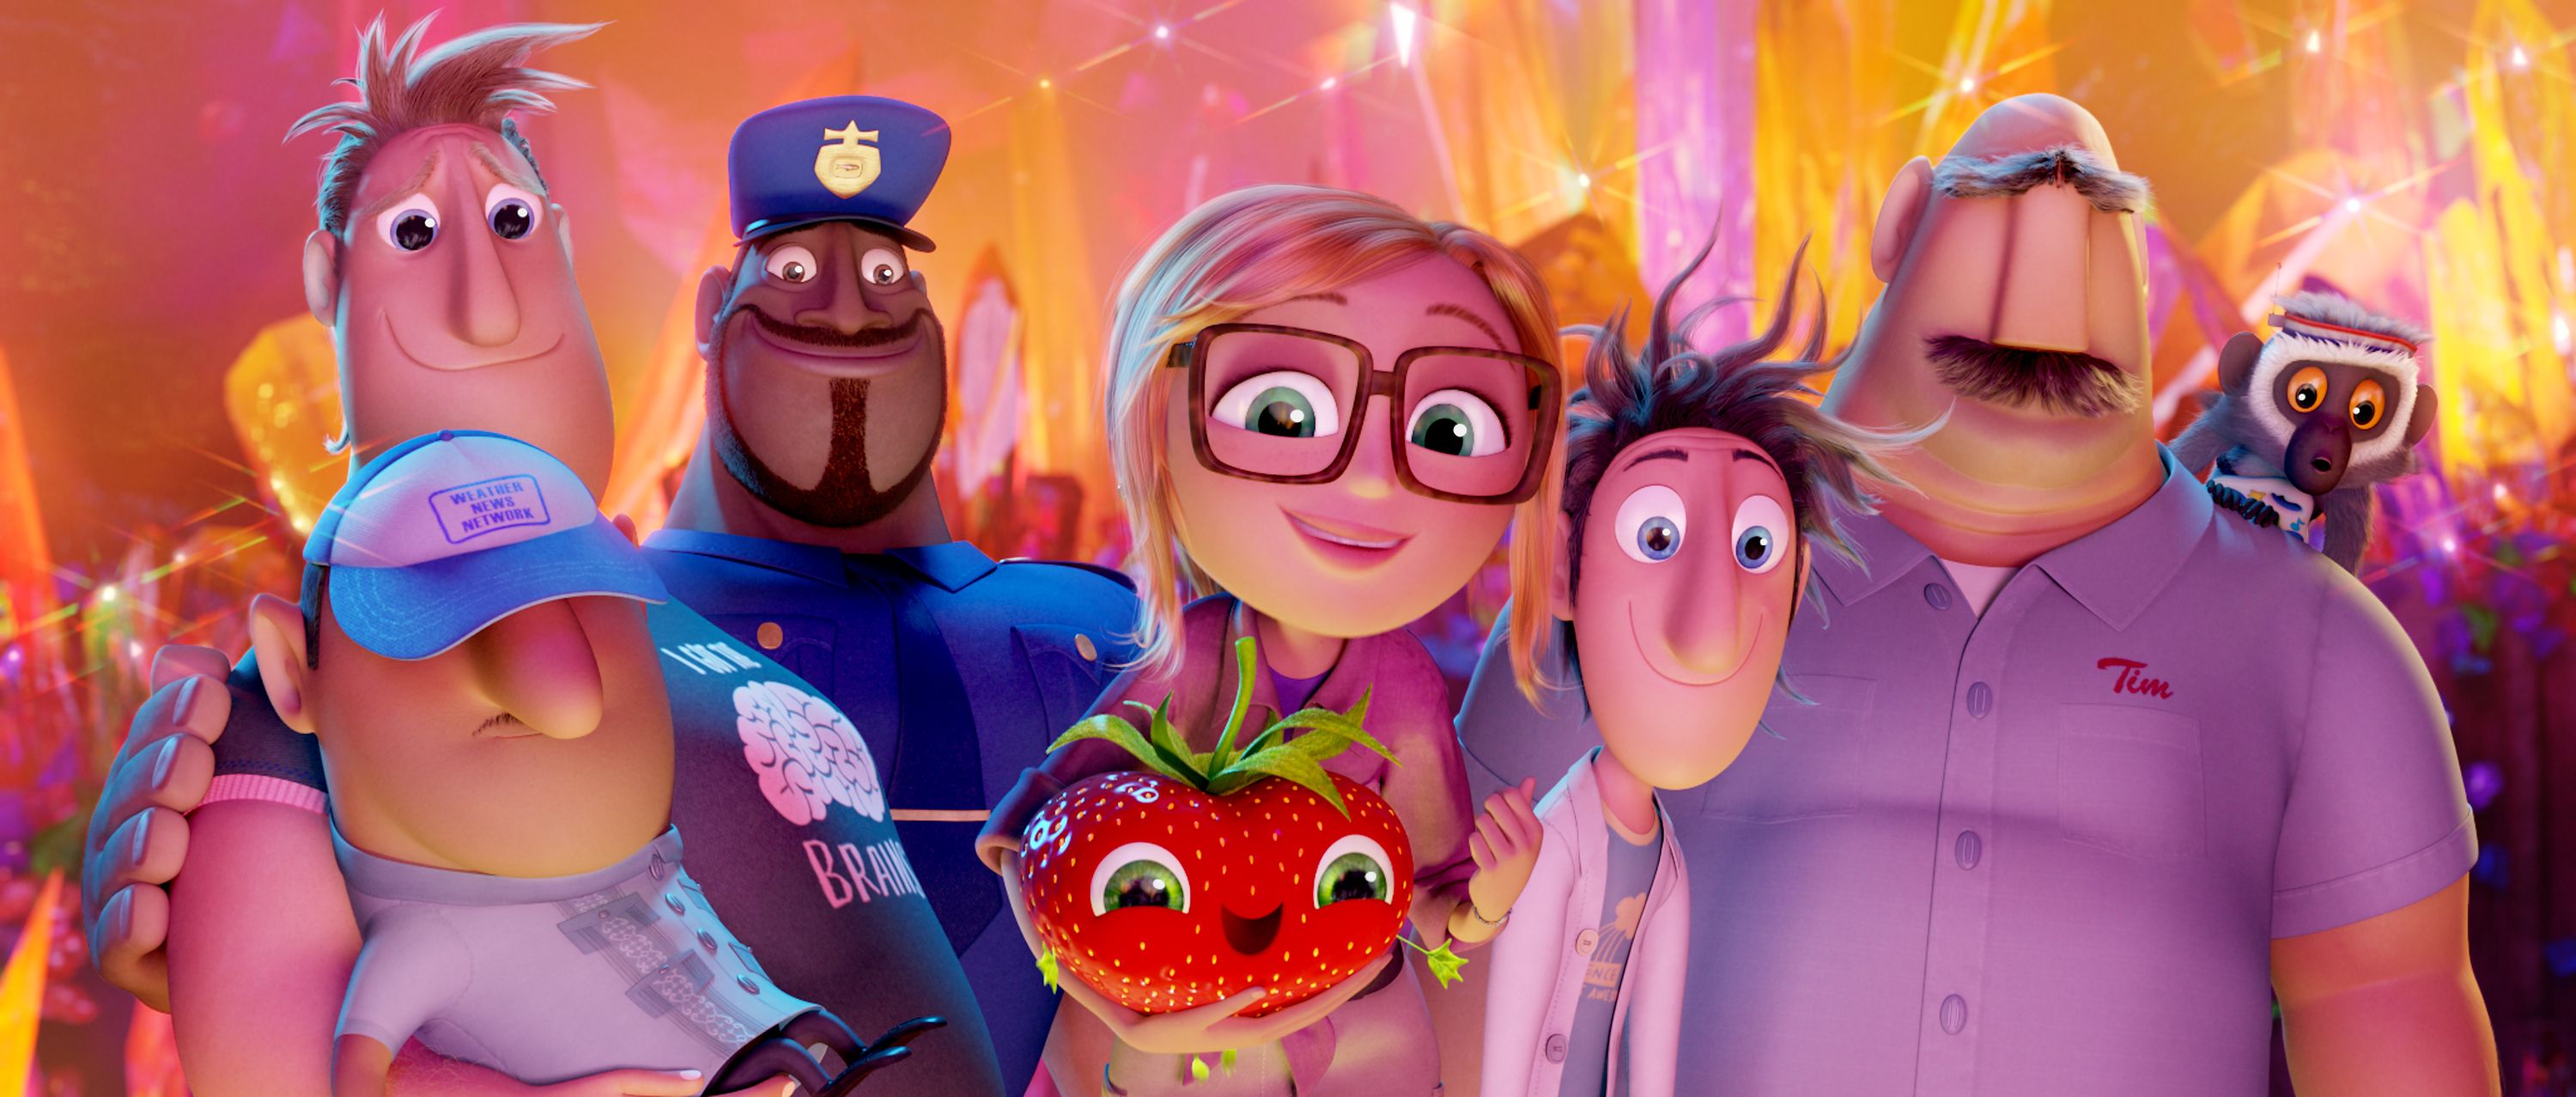 Cloudy with a Chance of Meatballs 2 Photo 11